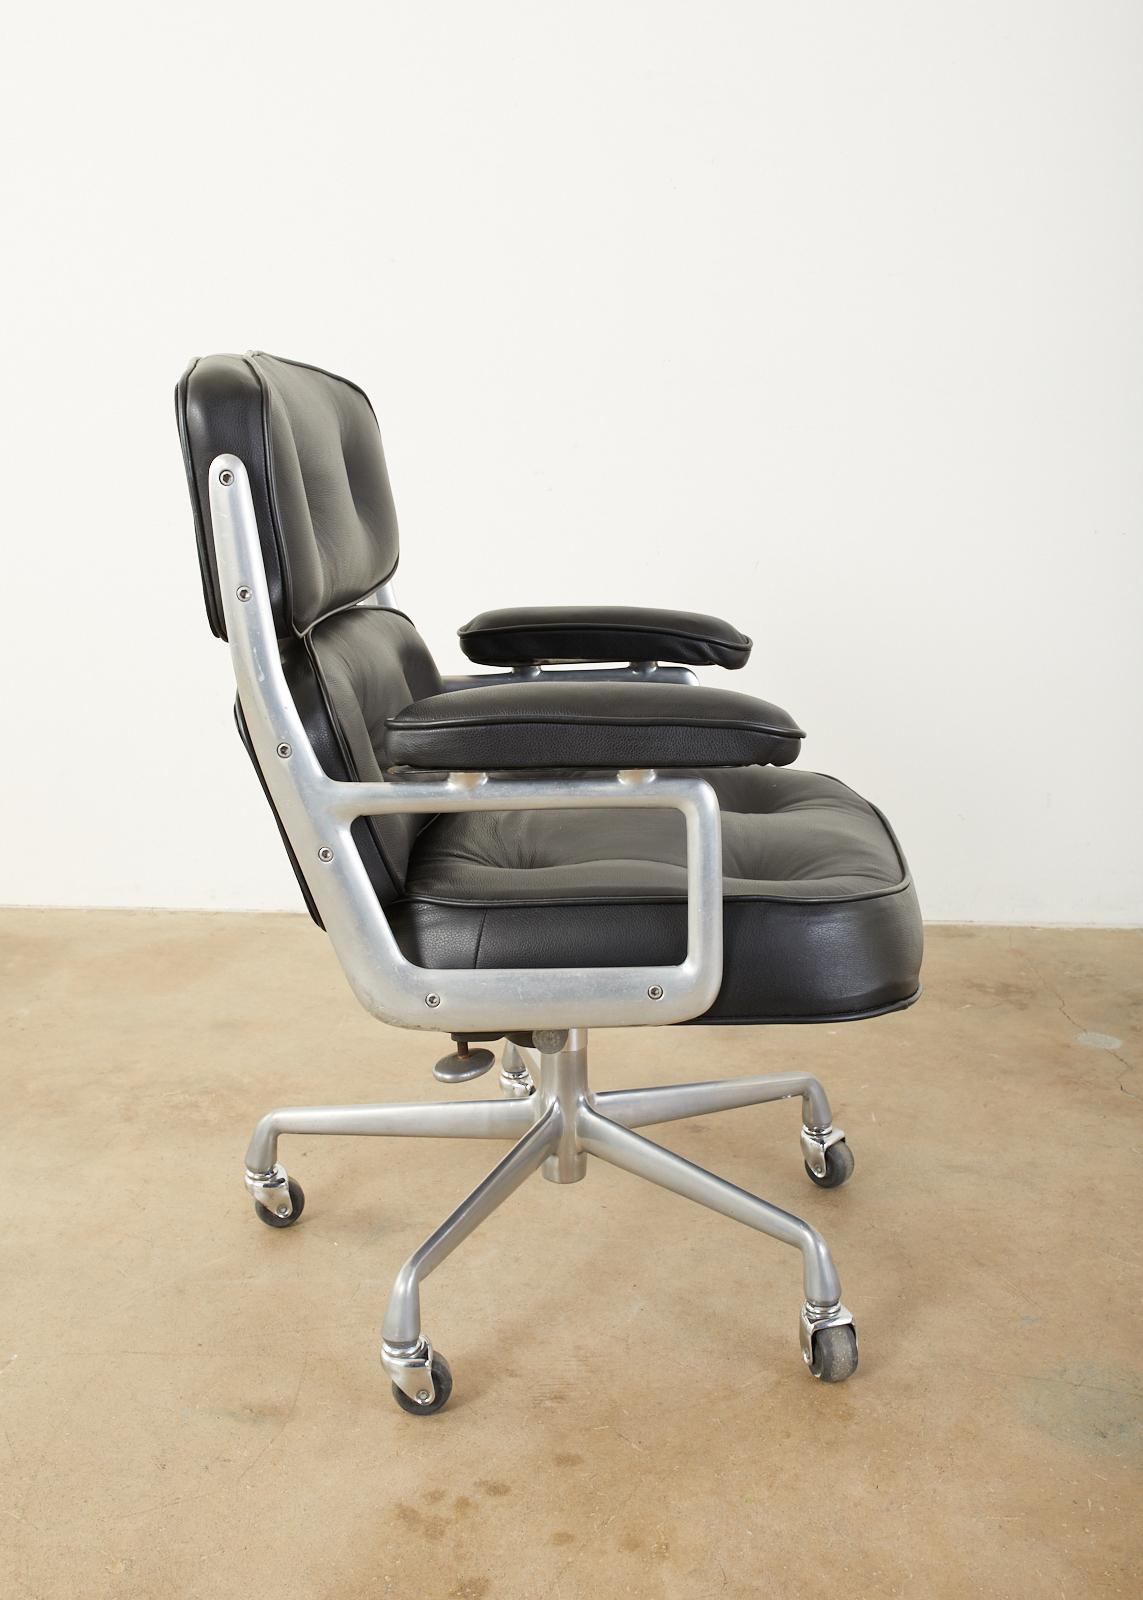 Mid-Century Modern Time Life Executive Desk Chair by Eames for Herman Miller